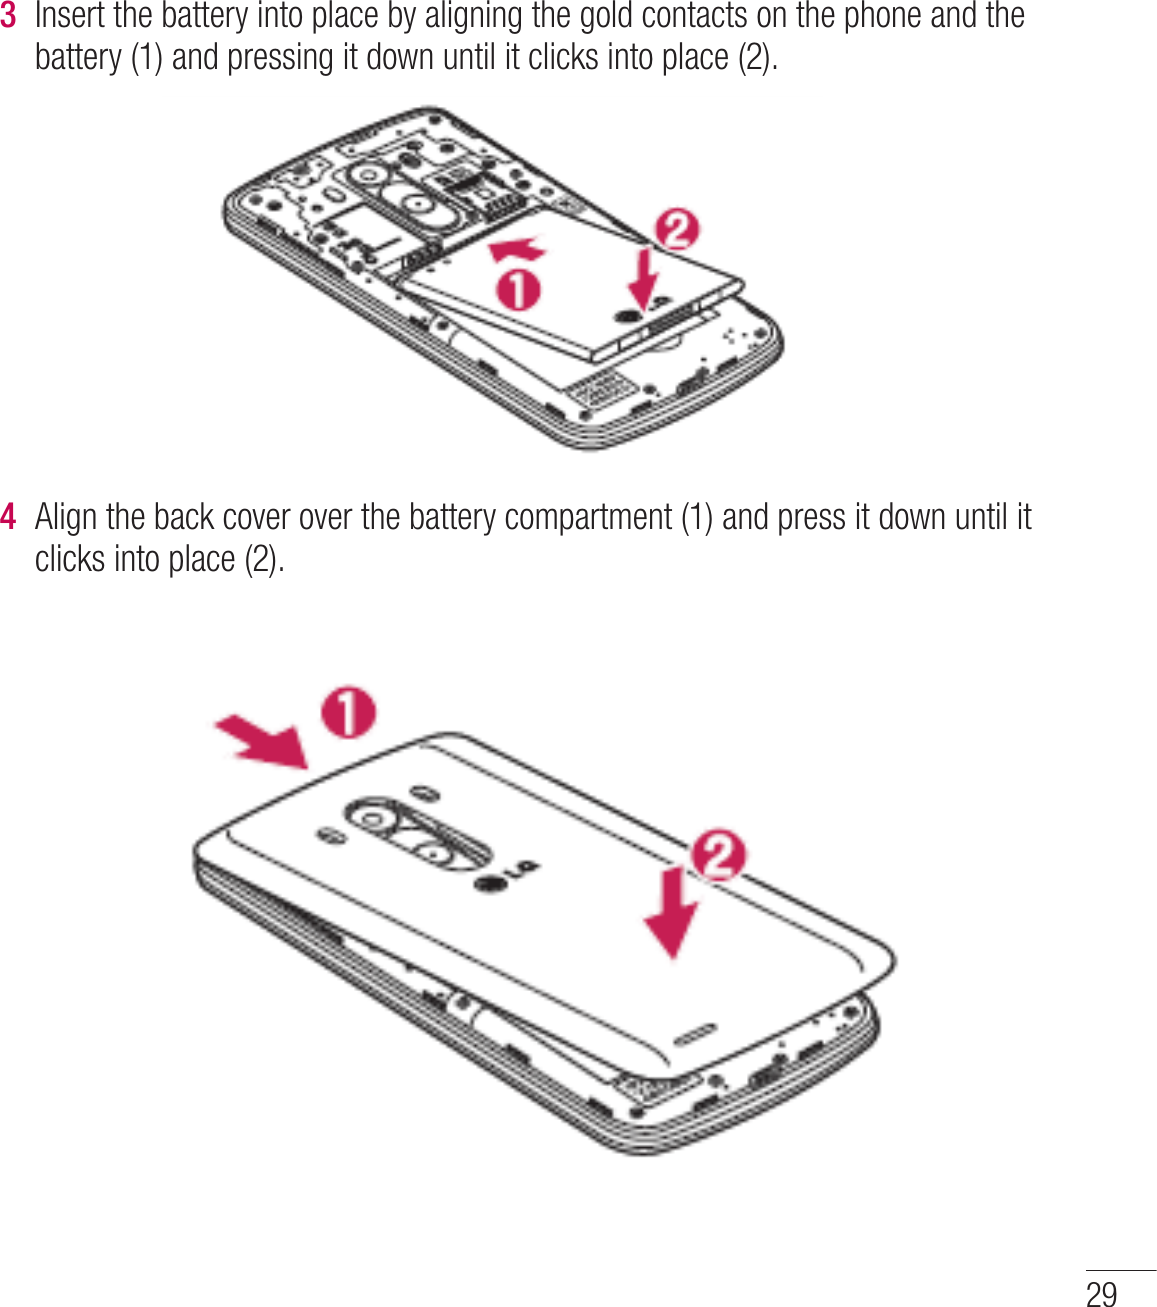 293  Insert the battery into place by aligning the gold contacts on the phone and the battery (1) and pressing it down until it clicks into place (2).4  Align the back cover over the battery compartment (1) and press it down until it clicks into place (2).